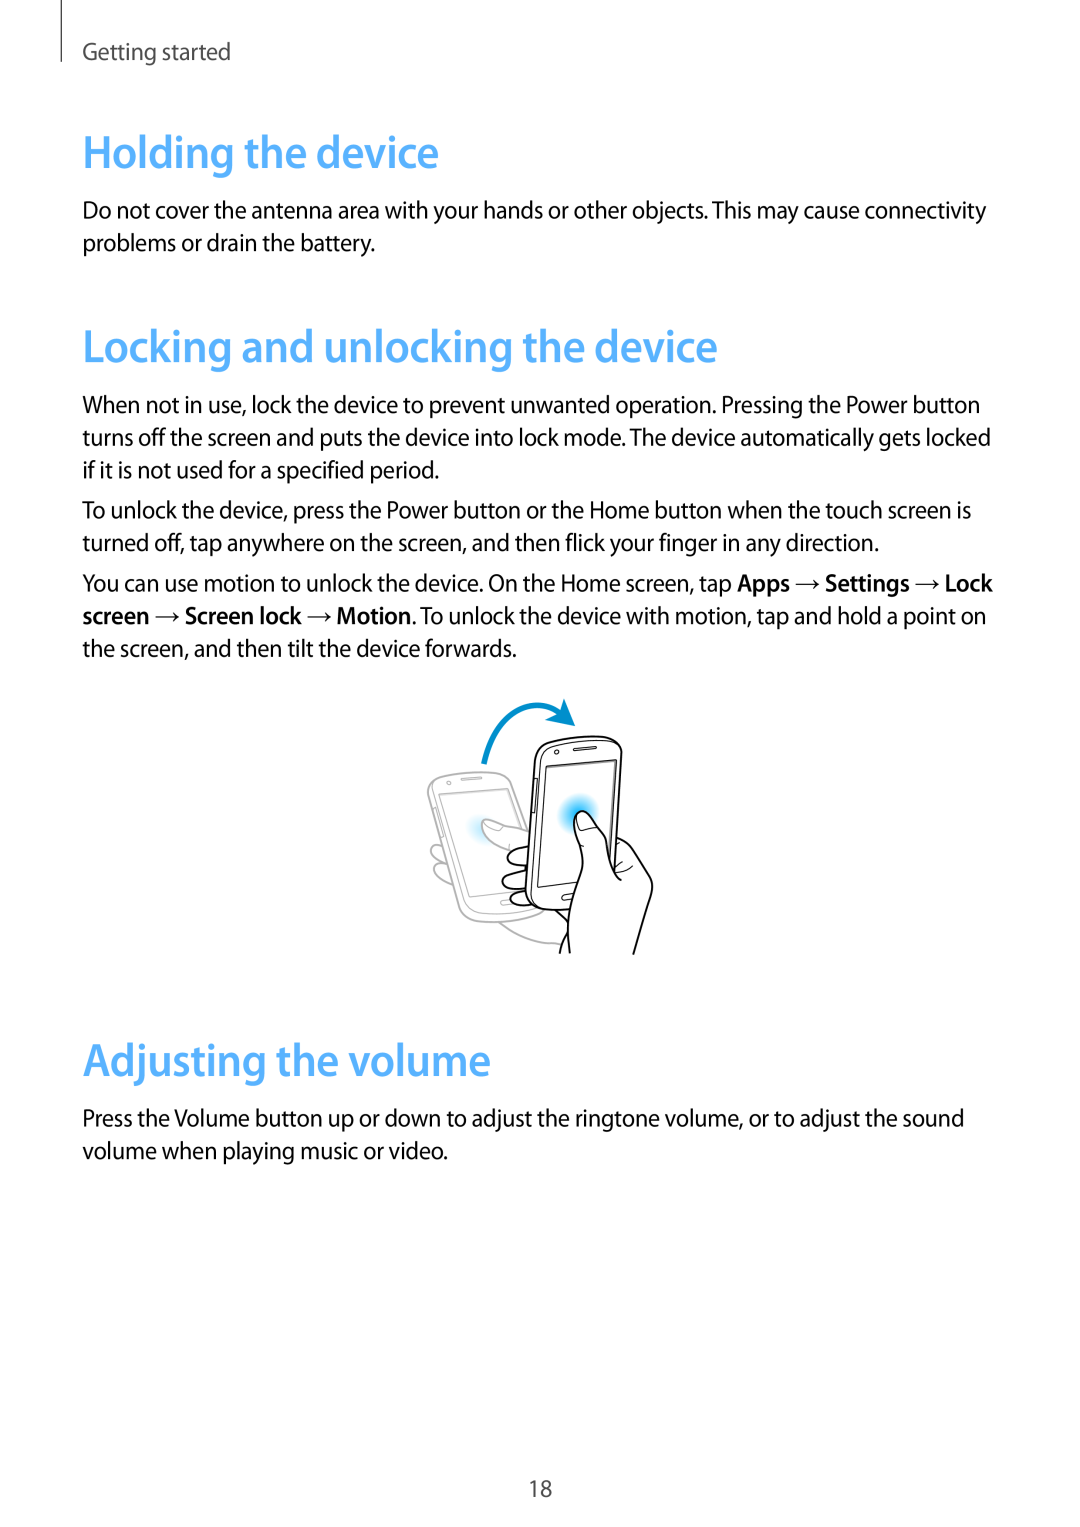 Samsung GT-I8730TAAITV manual Holding the device, Locking and unlocking the device, Adjusting the volume, Getting started 